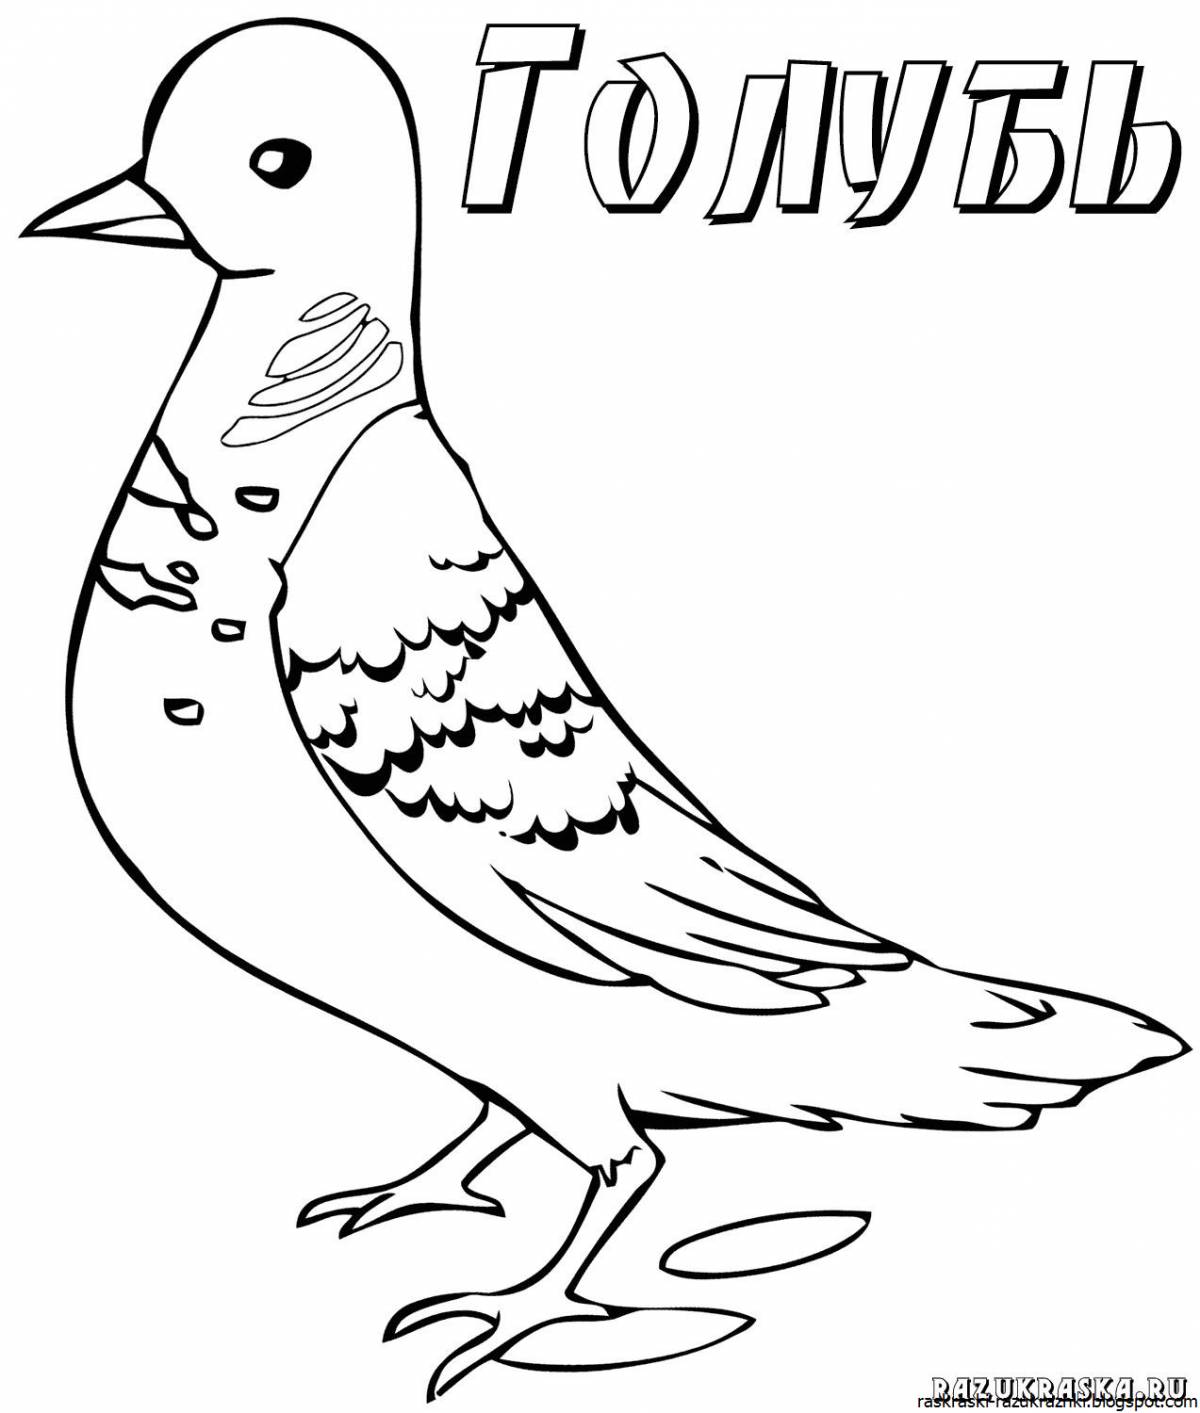 Fancy bird coloring pages for kids